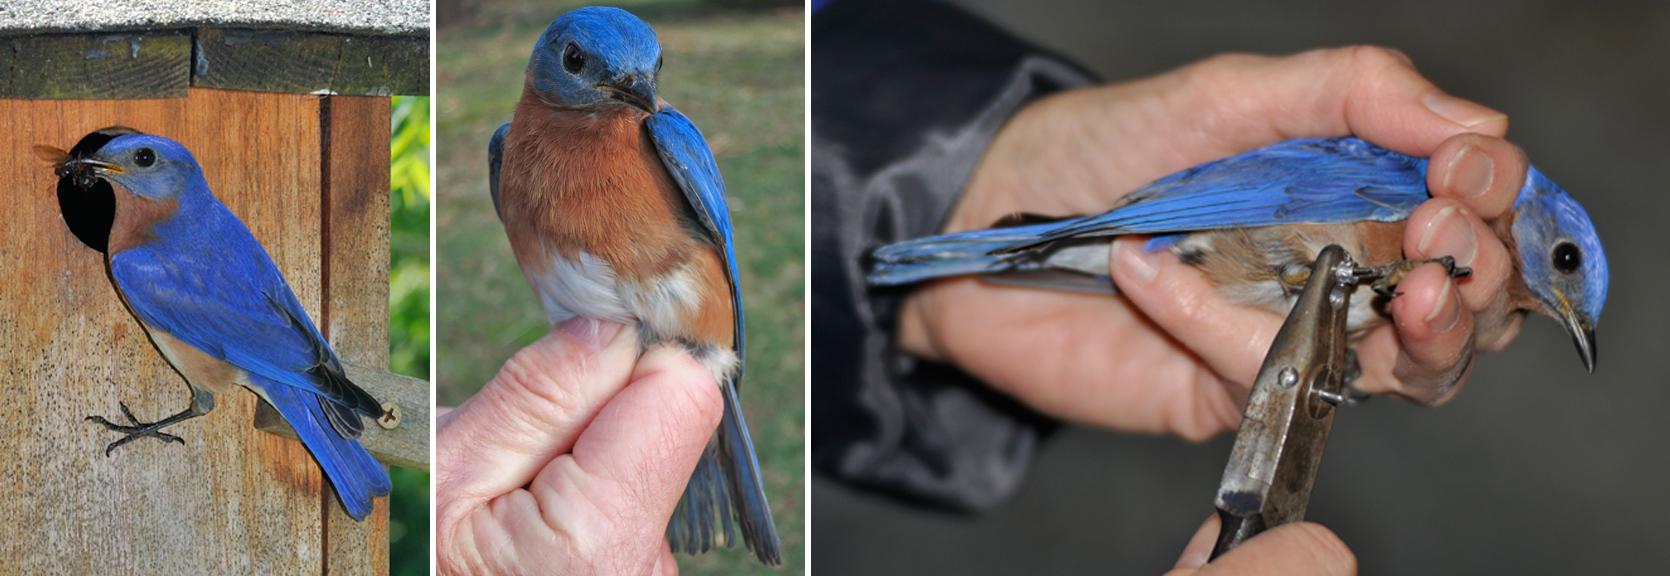 Bluebirds and Blue Birds are not Blue!